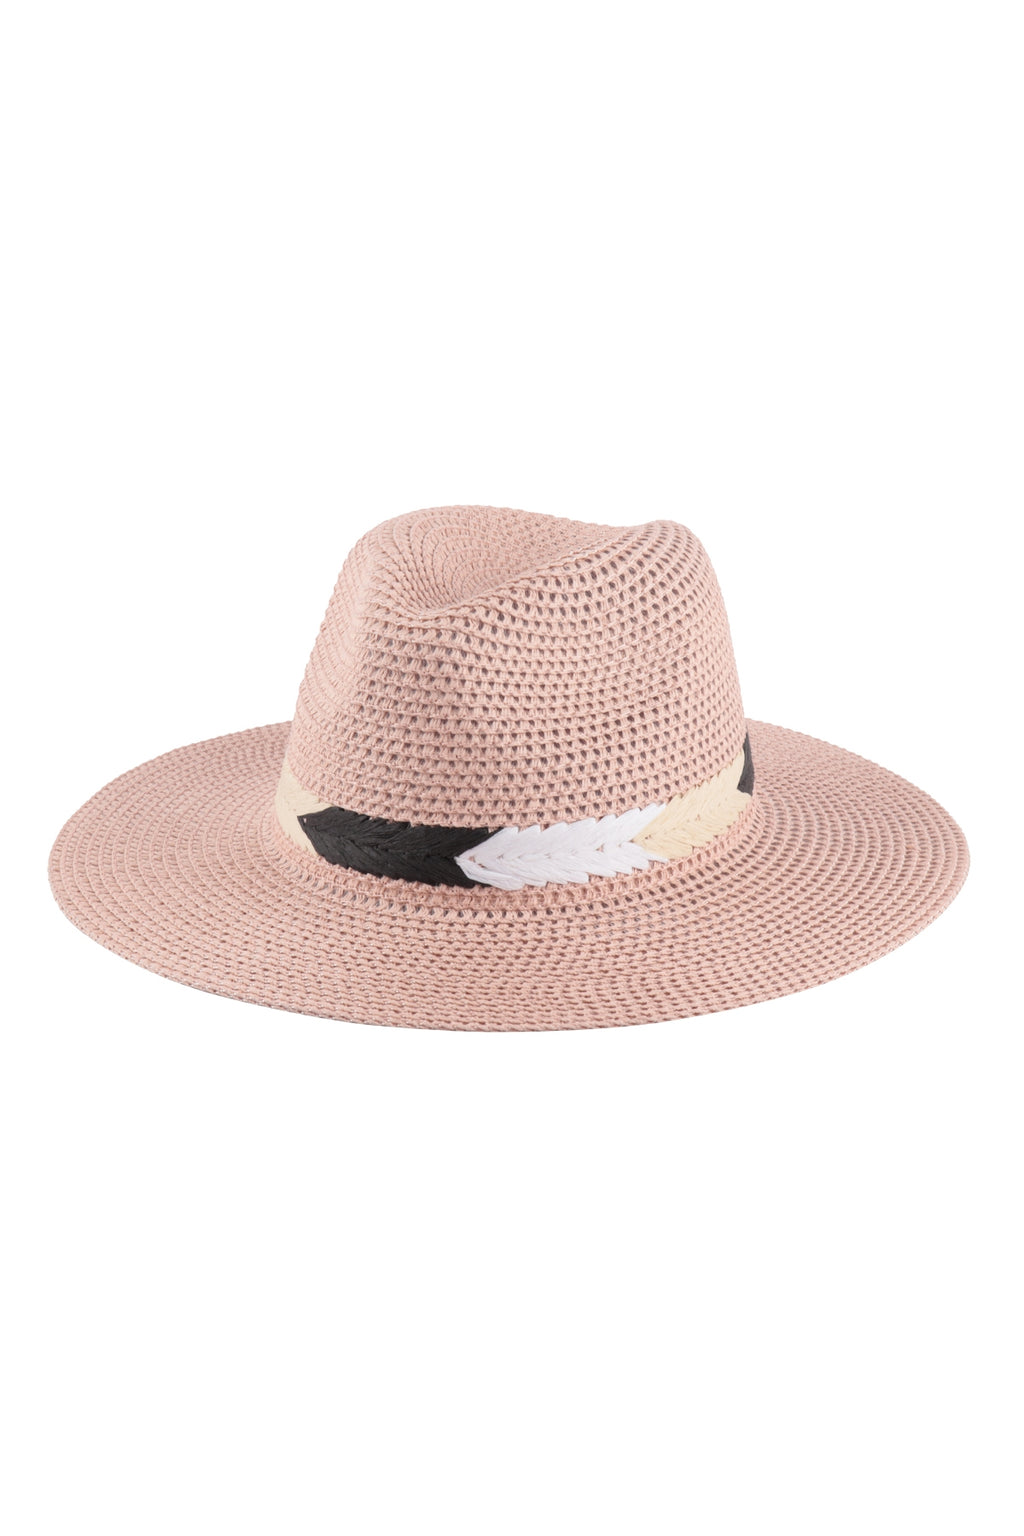 Panama Brim Summer Hat with Braided Stripe Accent Light Pink - Pack of 6